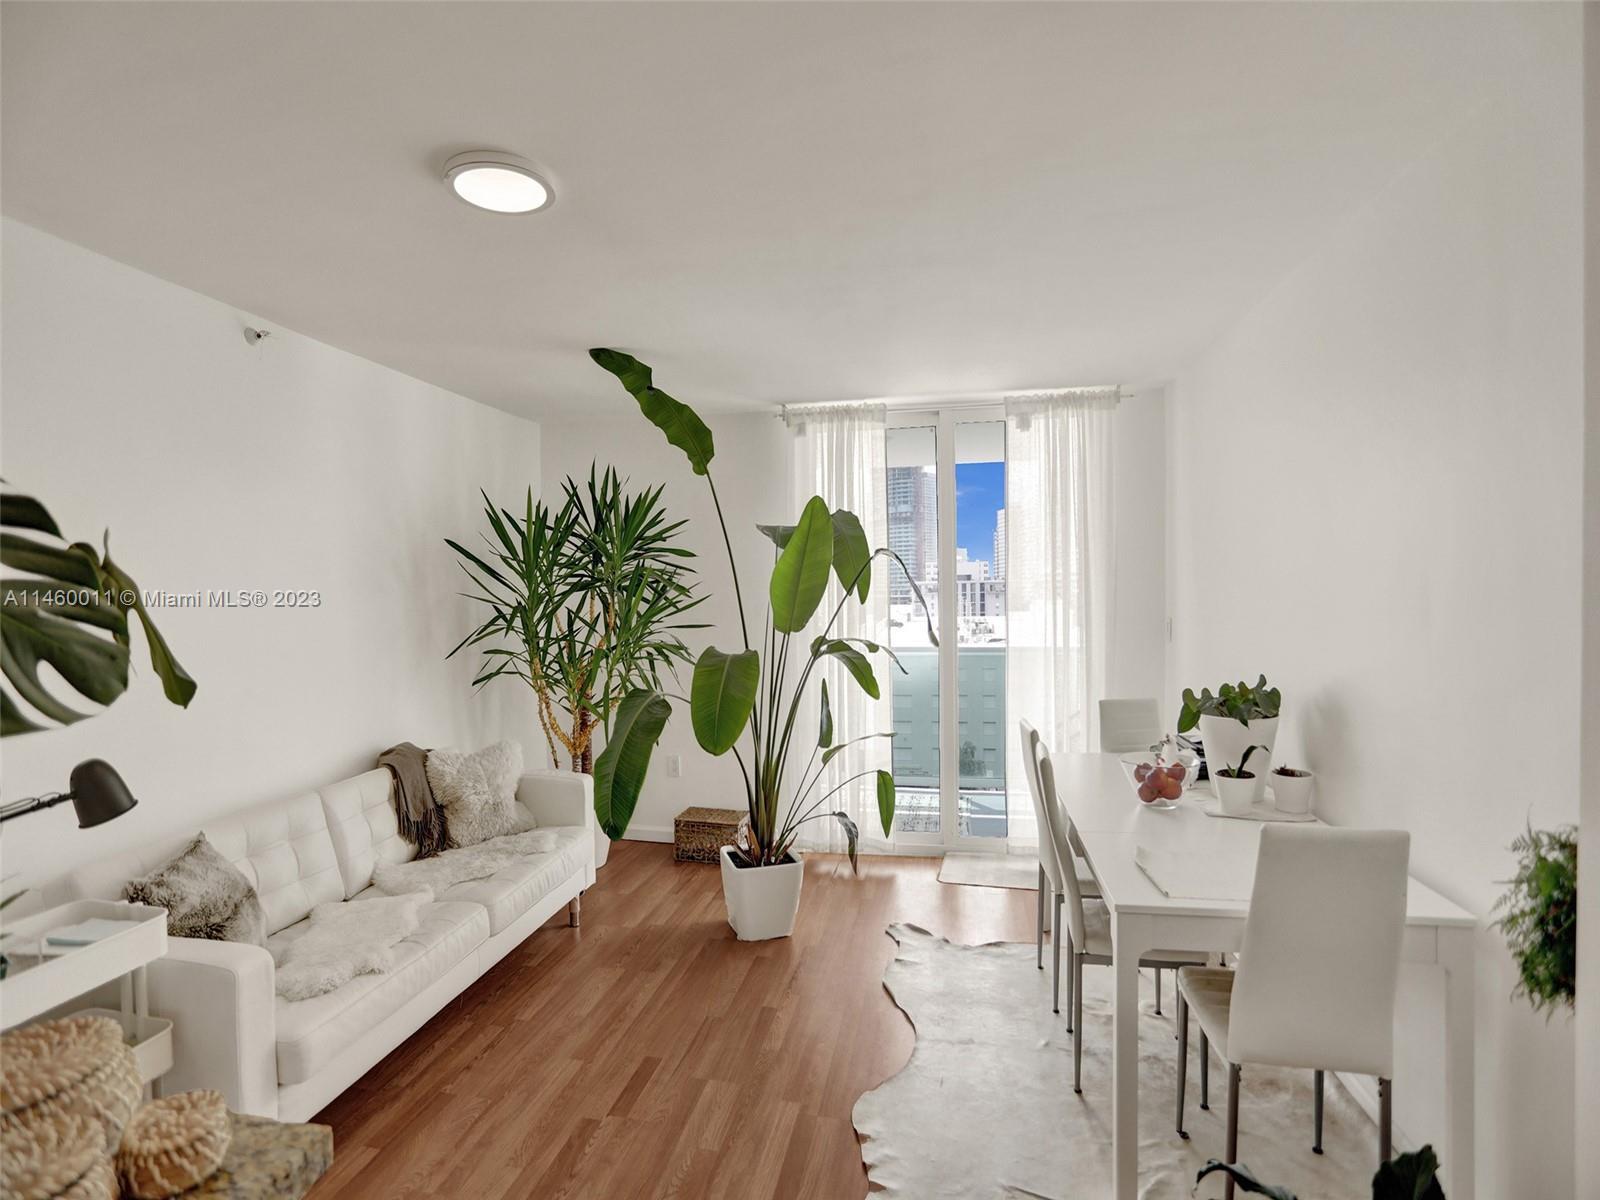 Live, Work & Play! This Penthouse unit offers 1 bedroom / 1 bath in one of the most desirable street